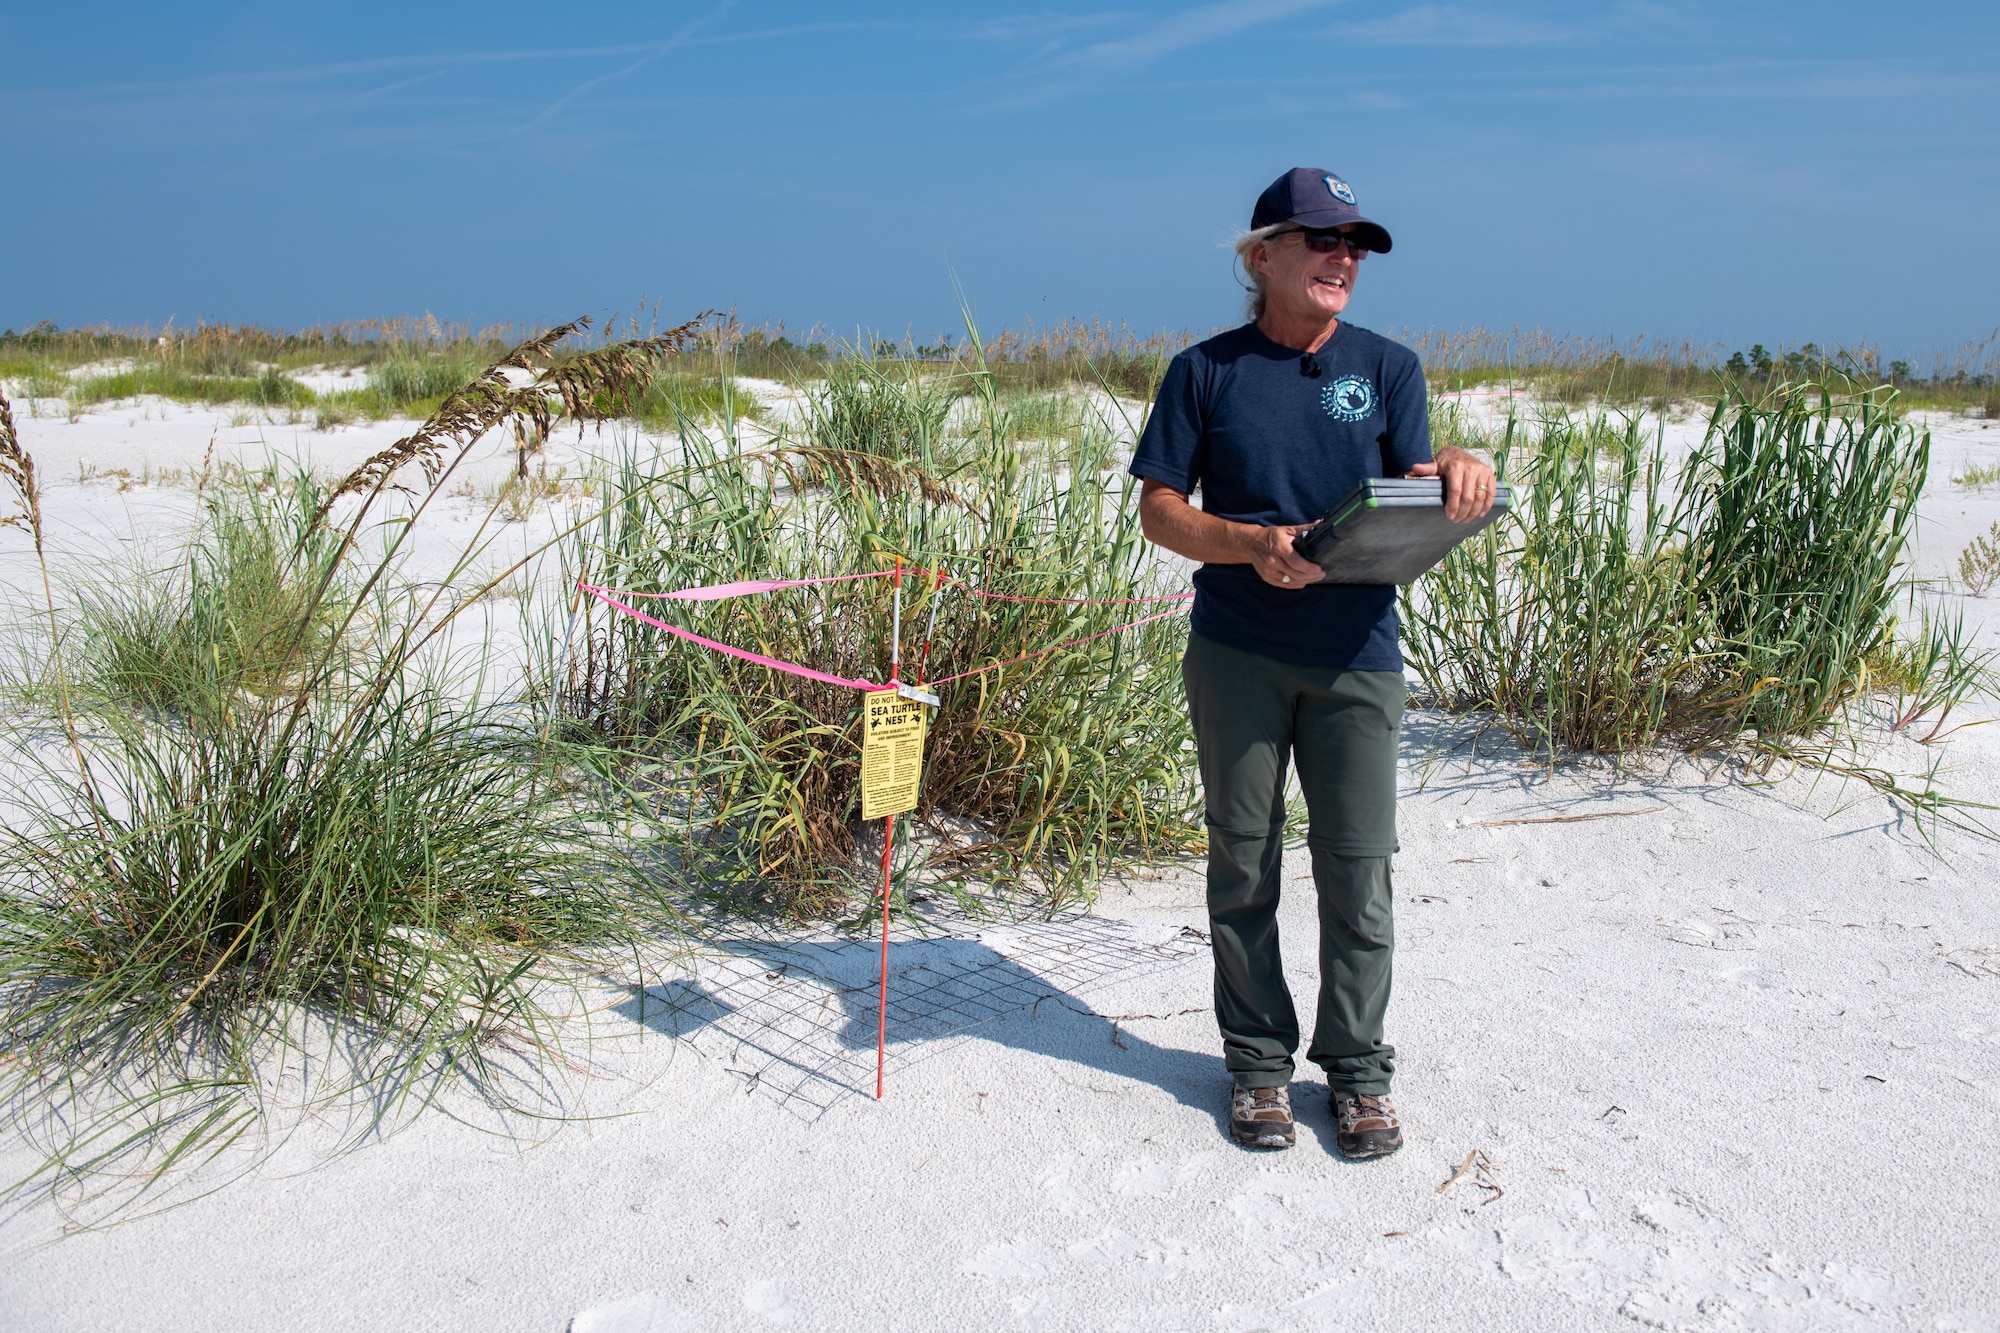 Woman stands by sea turtle nest.